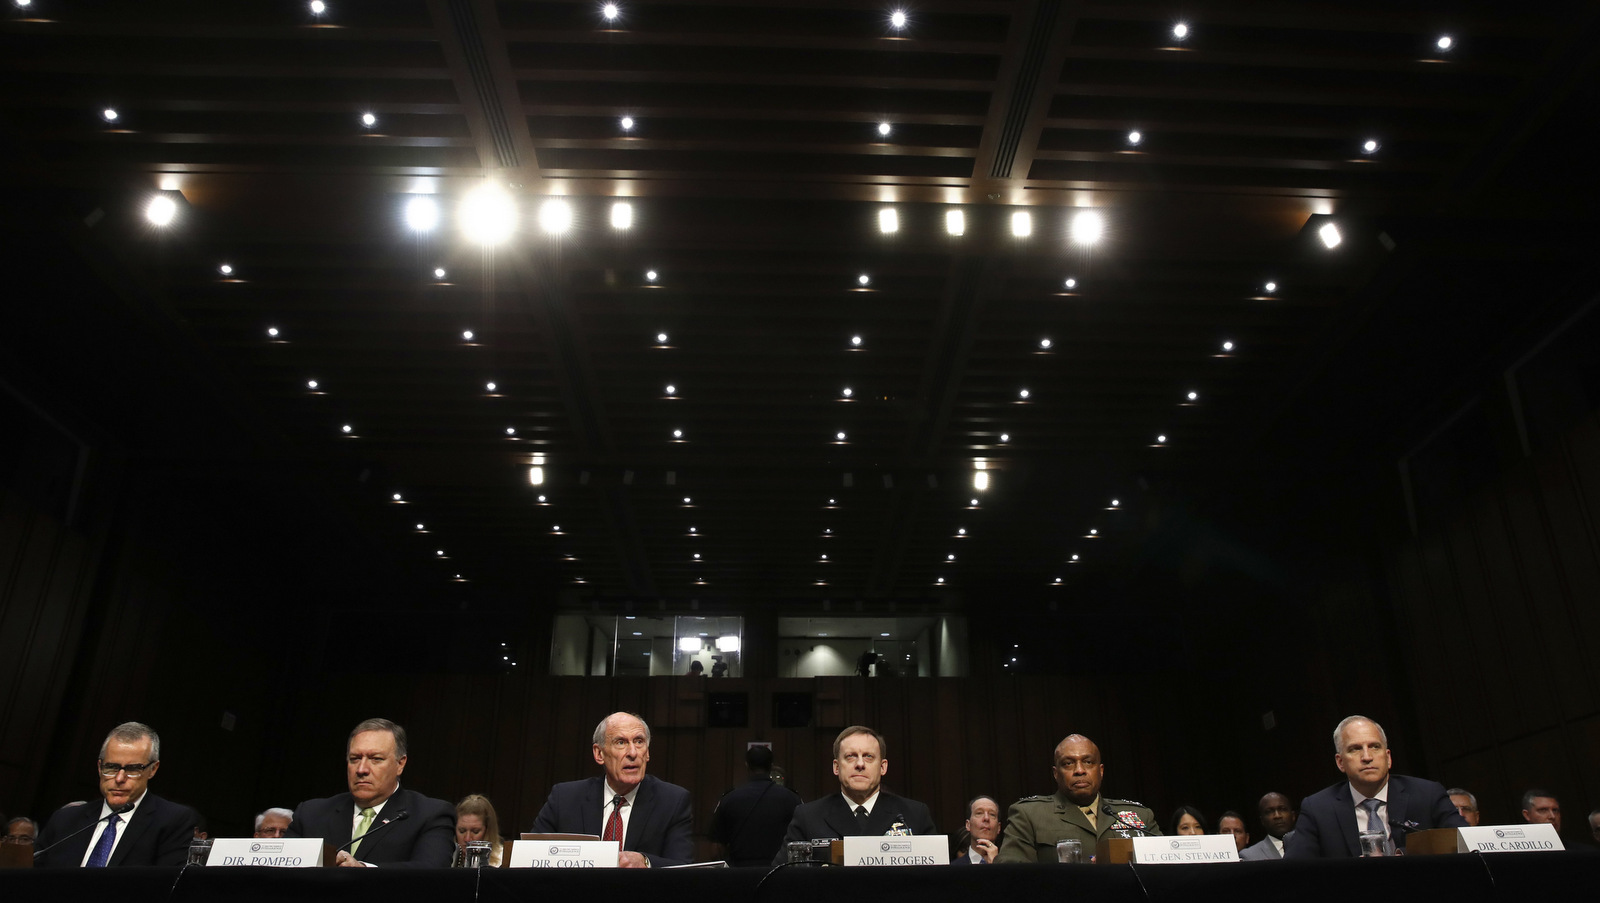 The Top brass of US intelligence agencies prepare to testify in Washington, May 11, 2017, before the Senate Intelligence Committee hearing on major threats facing the U.S. (AP/Jacquelyn Martin)